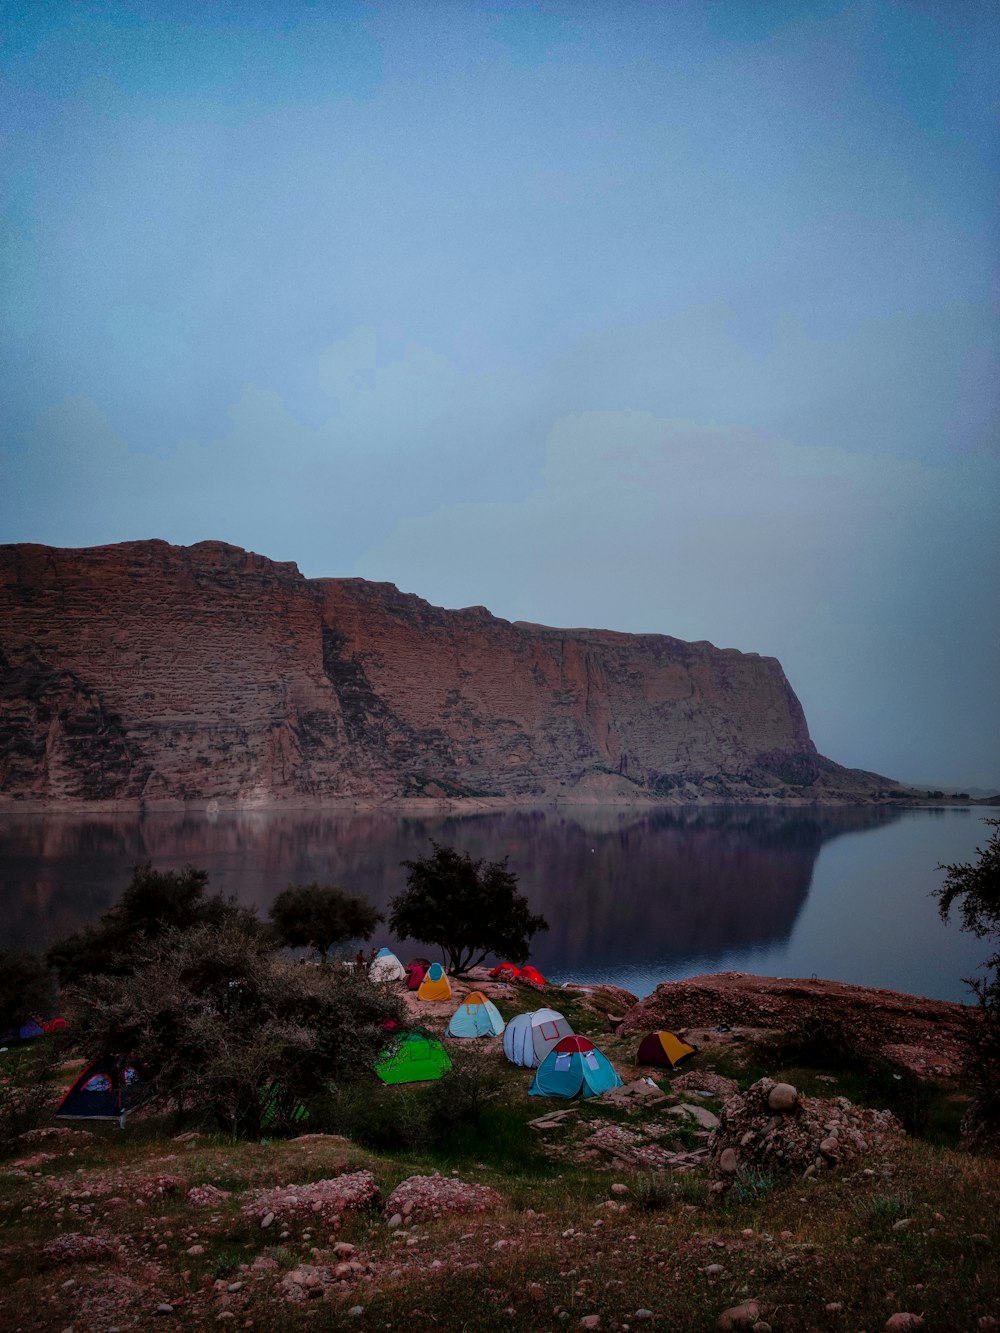 a group of tents sitting on top of a lush green hillside